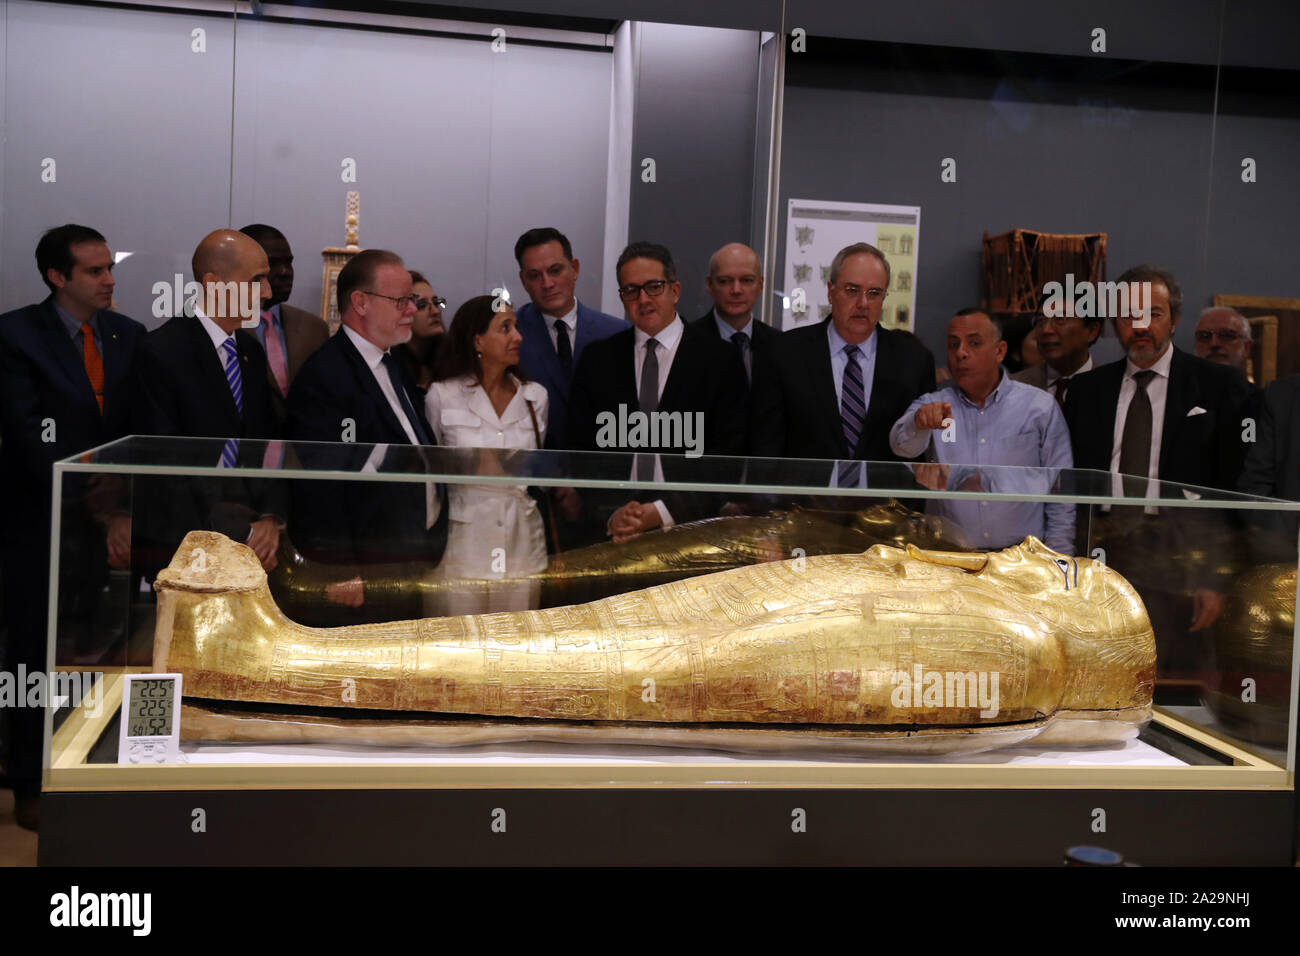 Cairo, Egypt. 1st Oct, 2019. The coffin of Nedjemankh is displayed at the National Museum of Egyptian Civilization in Cairo, Egypt, on Oct. 1, 2019. A gilded coffin that dated back to the Ptolemaic dynasty, dissolved in 50 B.C., was displayed on Tuesday in the National Museum of Egyptian Civilization (NMEC) in Cairo's Fustat district. The coffin of Nedjemankh, an ancient Egyptian priest, was returned to Egypt on Wednesday after it was determined to be a looted antiquity, said Egyptian Minister of Antiquities, Khaled al-Anany in a press conference. Credit: Ahmed Gomma/Xinhua/Alamy Live News Stock Photo